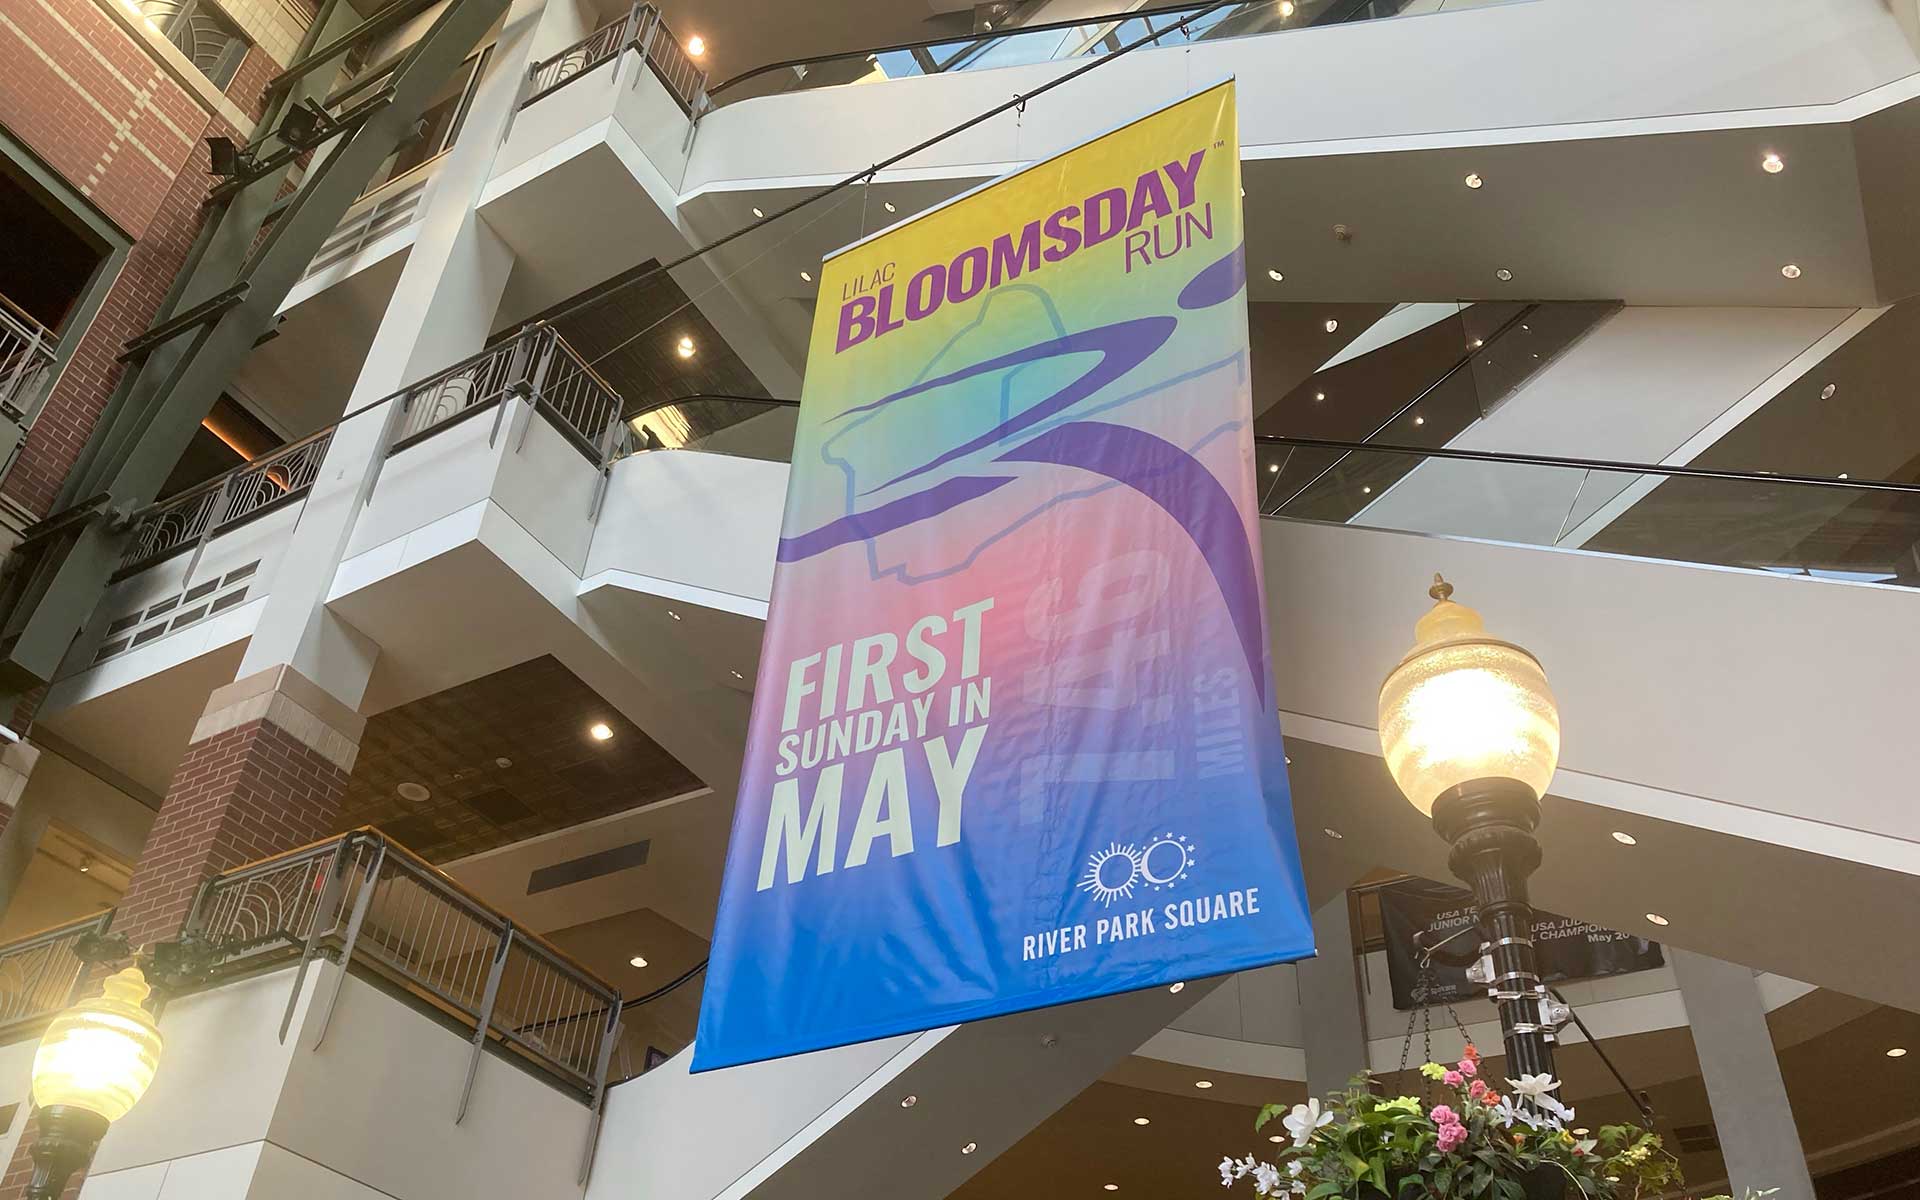 Here’s How to Help Bloomsday Run Smoothly City of Spokane, Washington